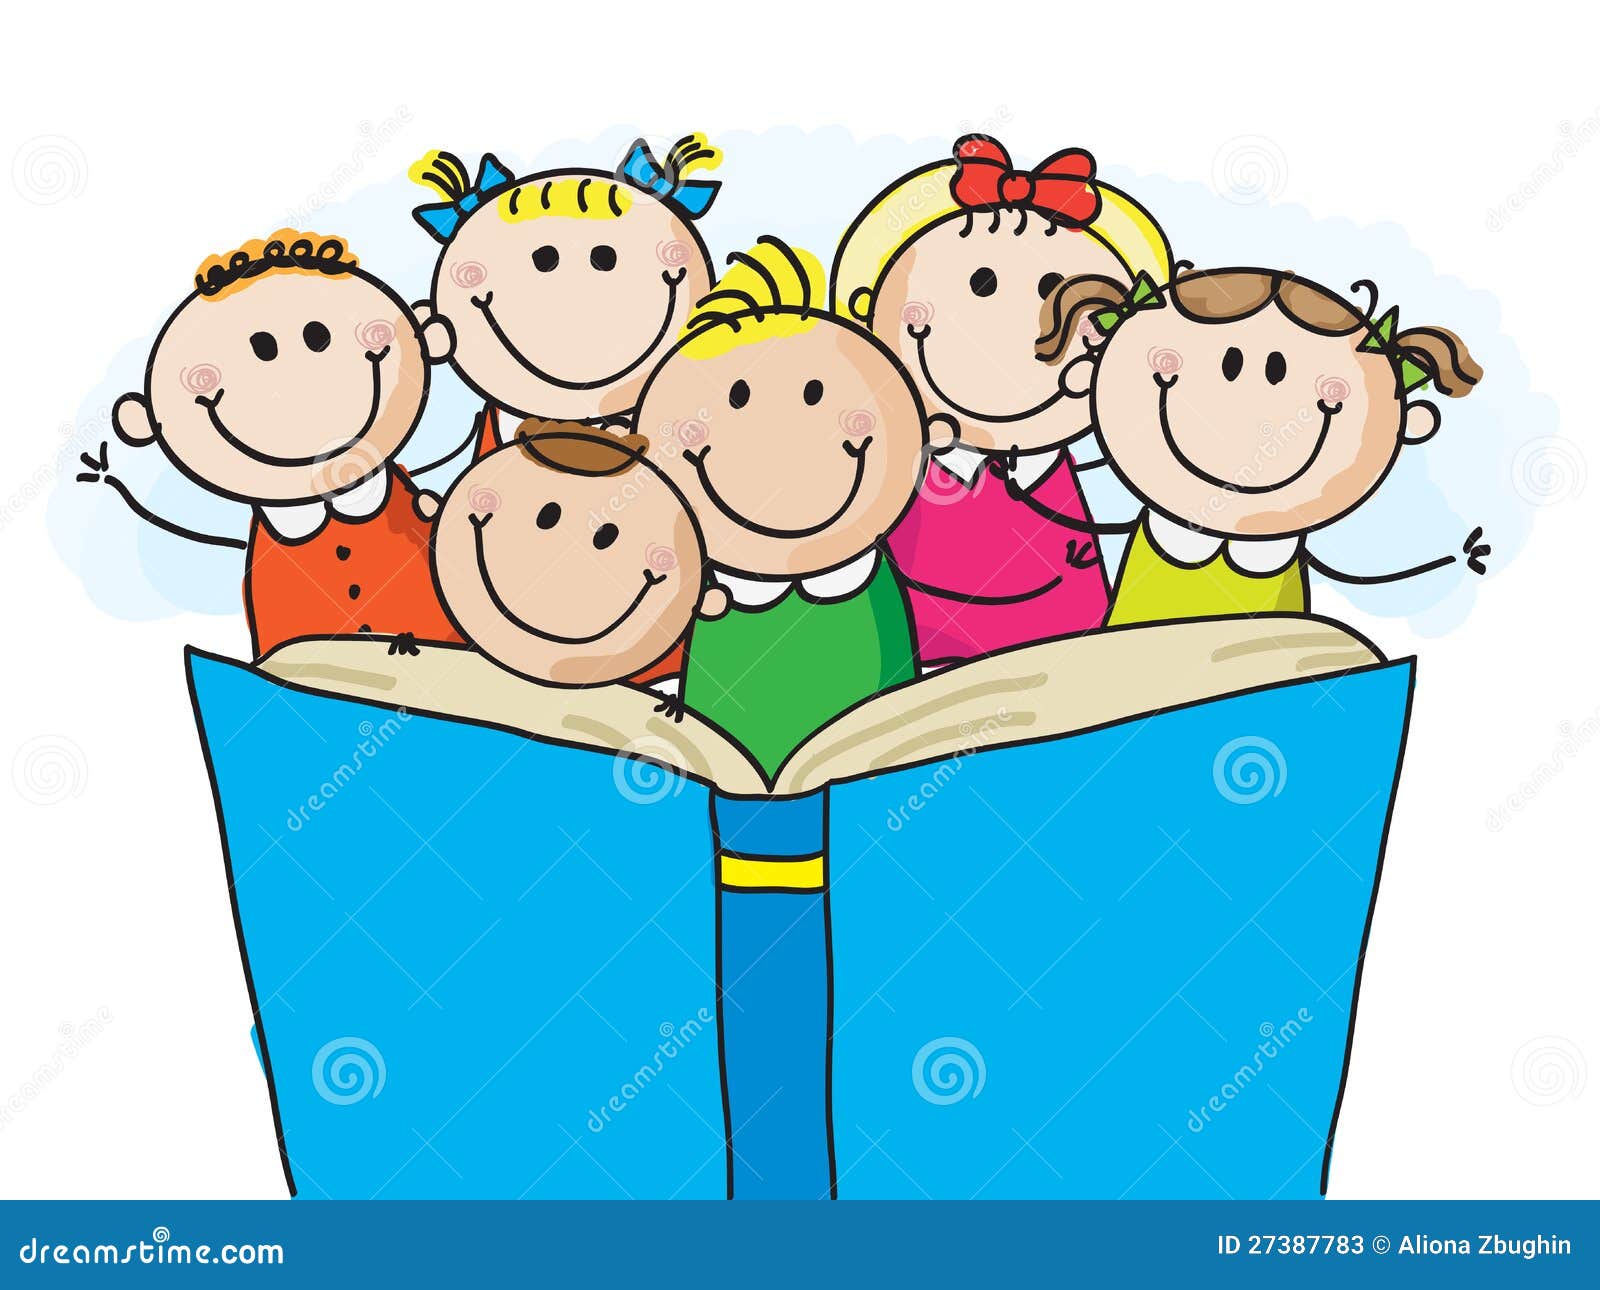 book group clipart - photo #34